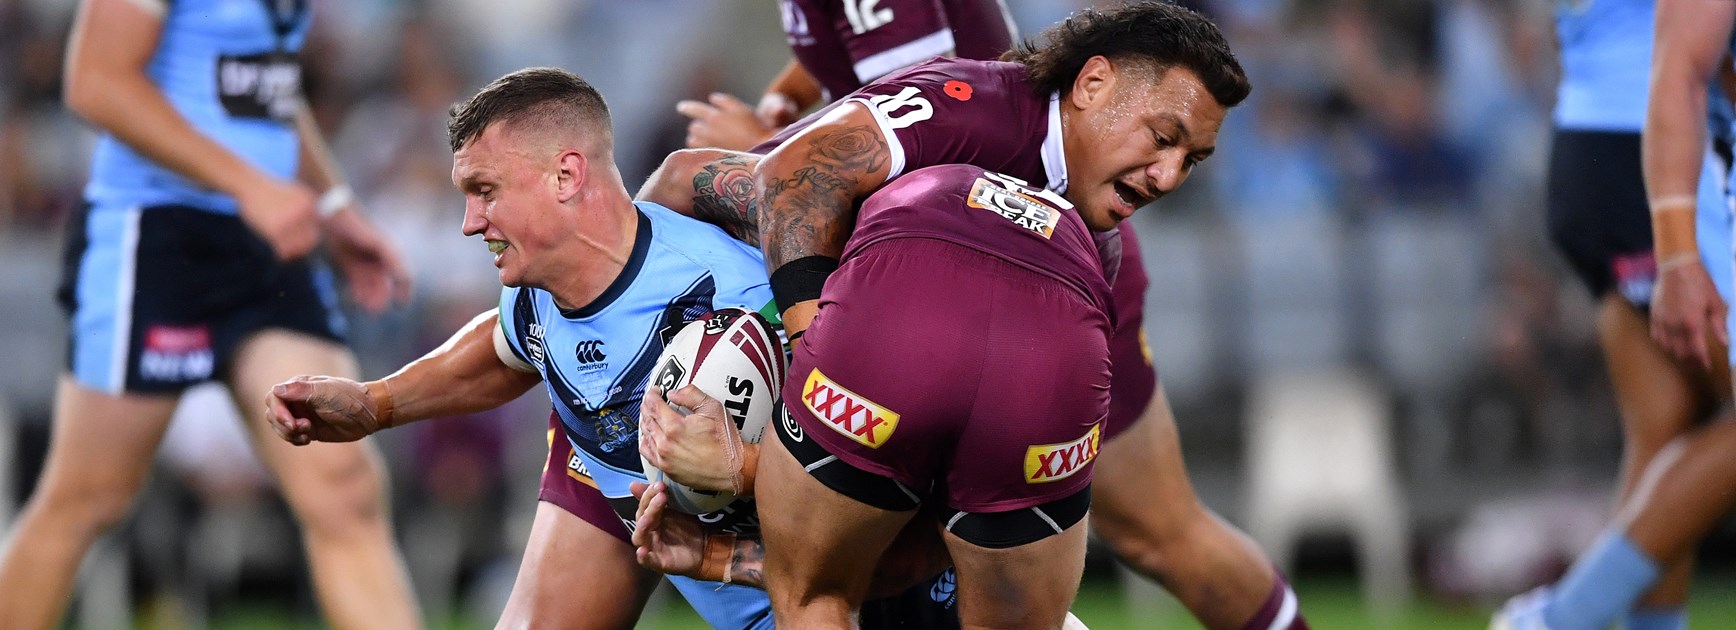 Everything you need to know: Ampol State of Origin 2020